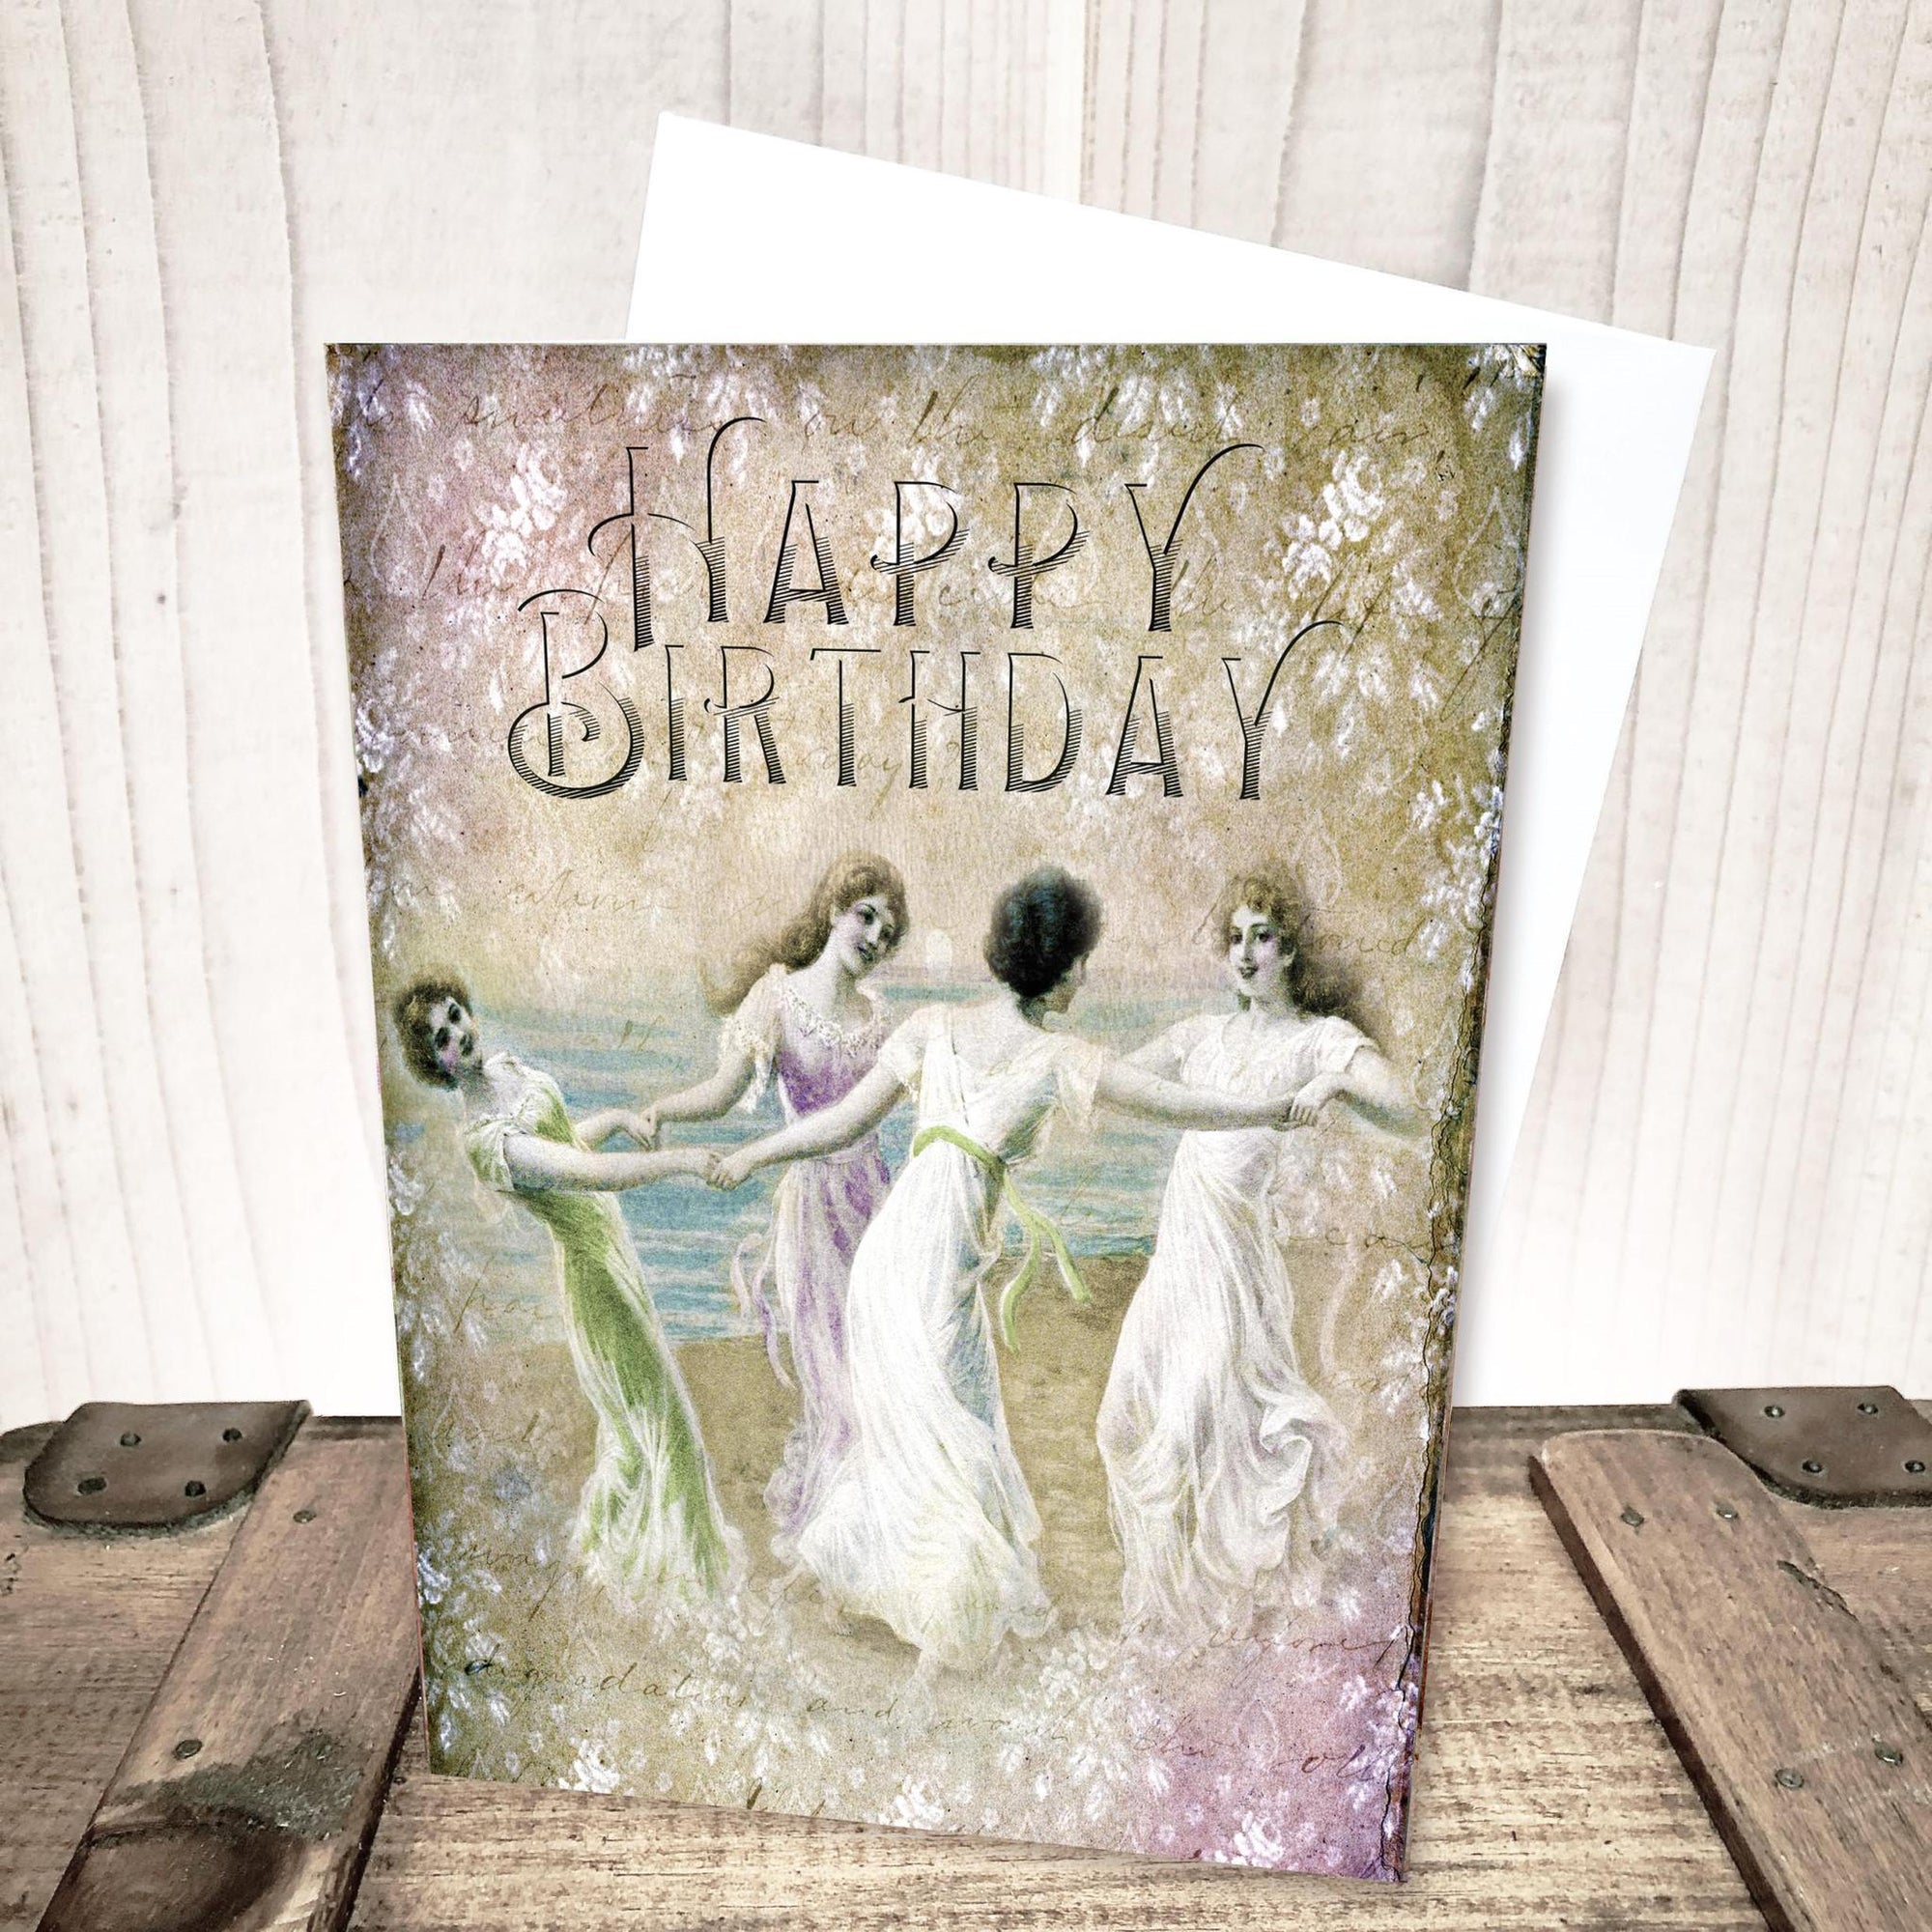 Beauties at the Beach Birthday Card by Yesterday's Best